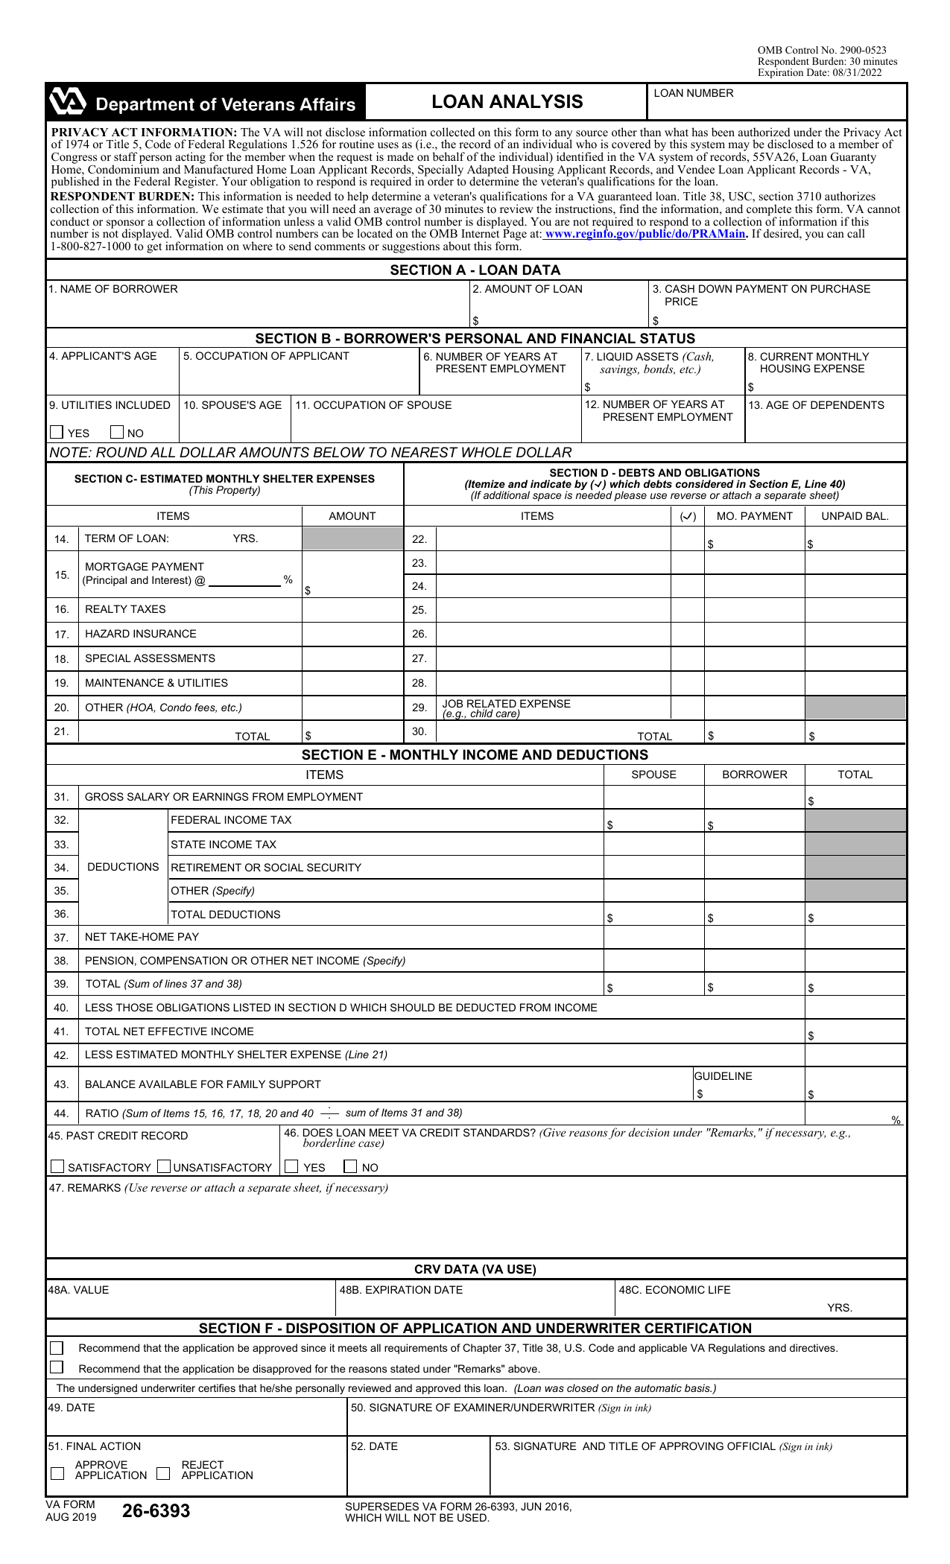 Va Form 26 6393 Download Fillable Pdf Or Fill Online Loan Free Nude